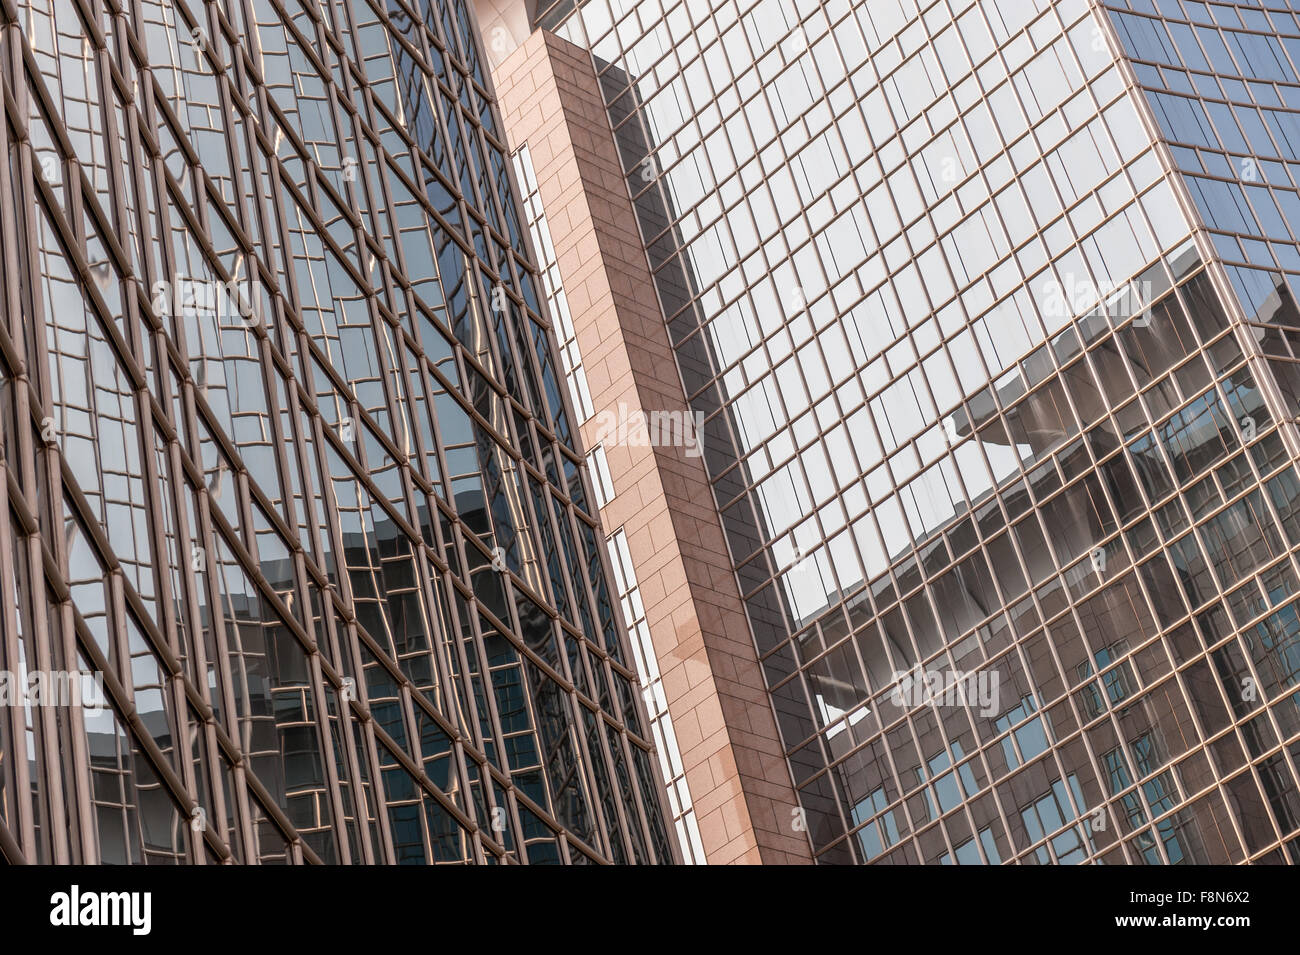 reflective mirrored glass on building Stock Photo